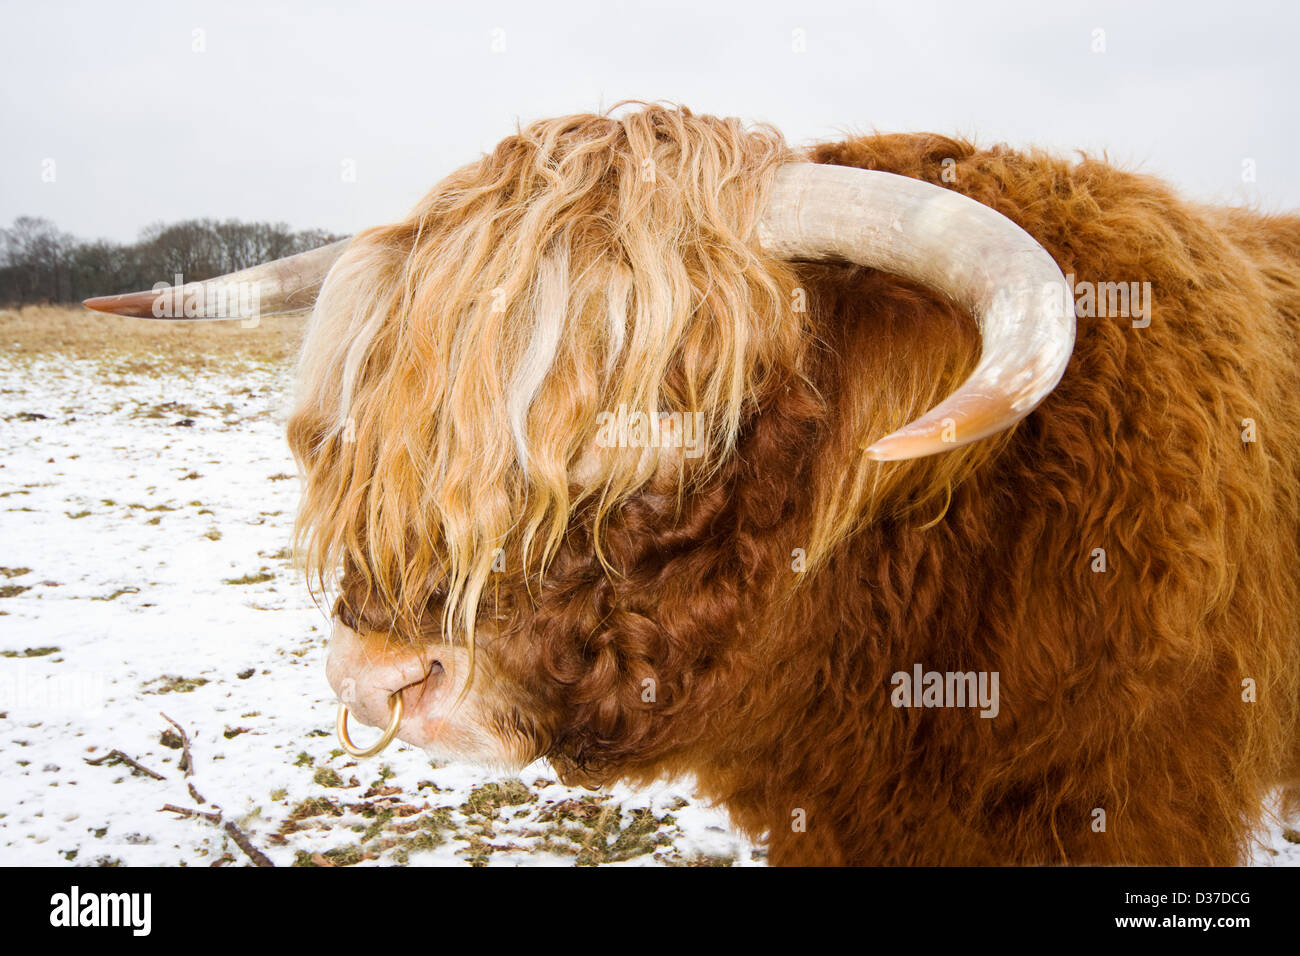 Highland bull, with a ring in its nose in a snowy field Stock Photo